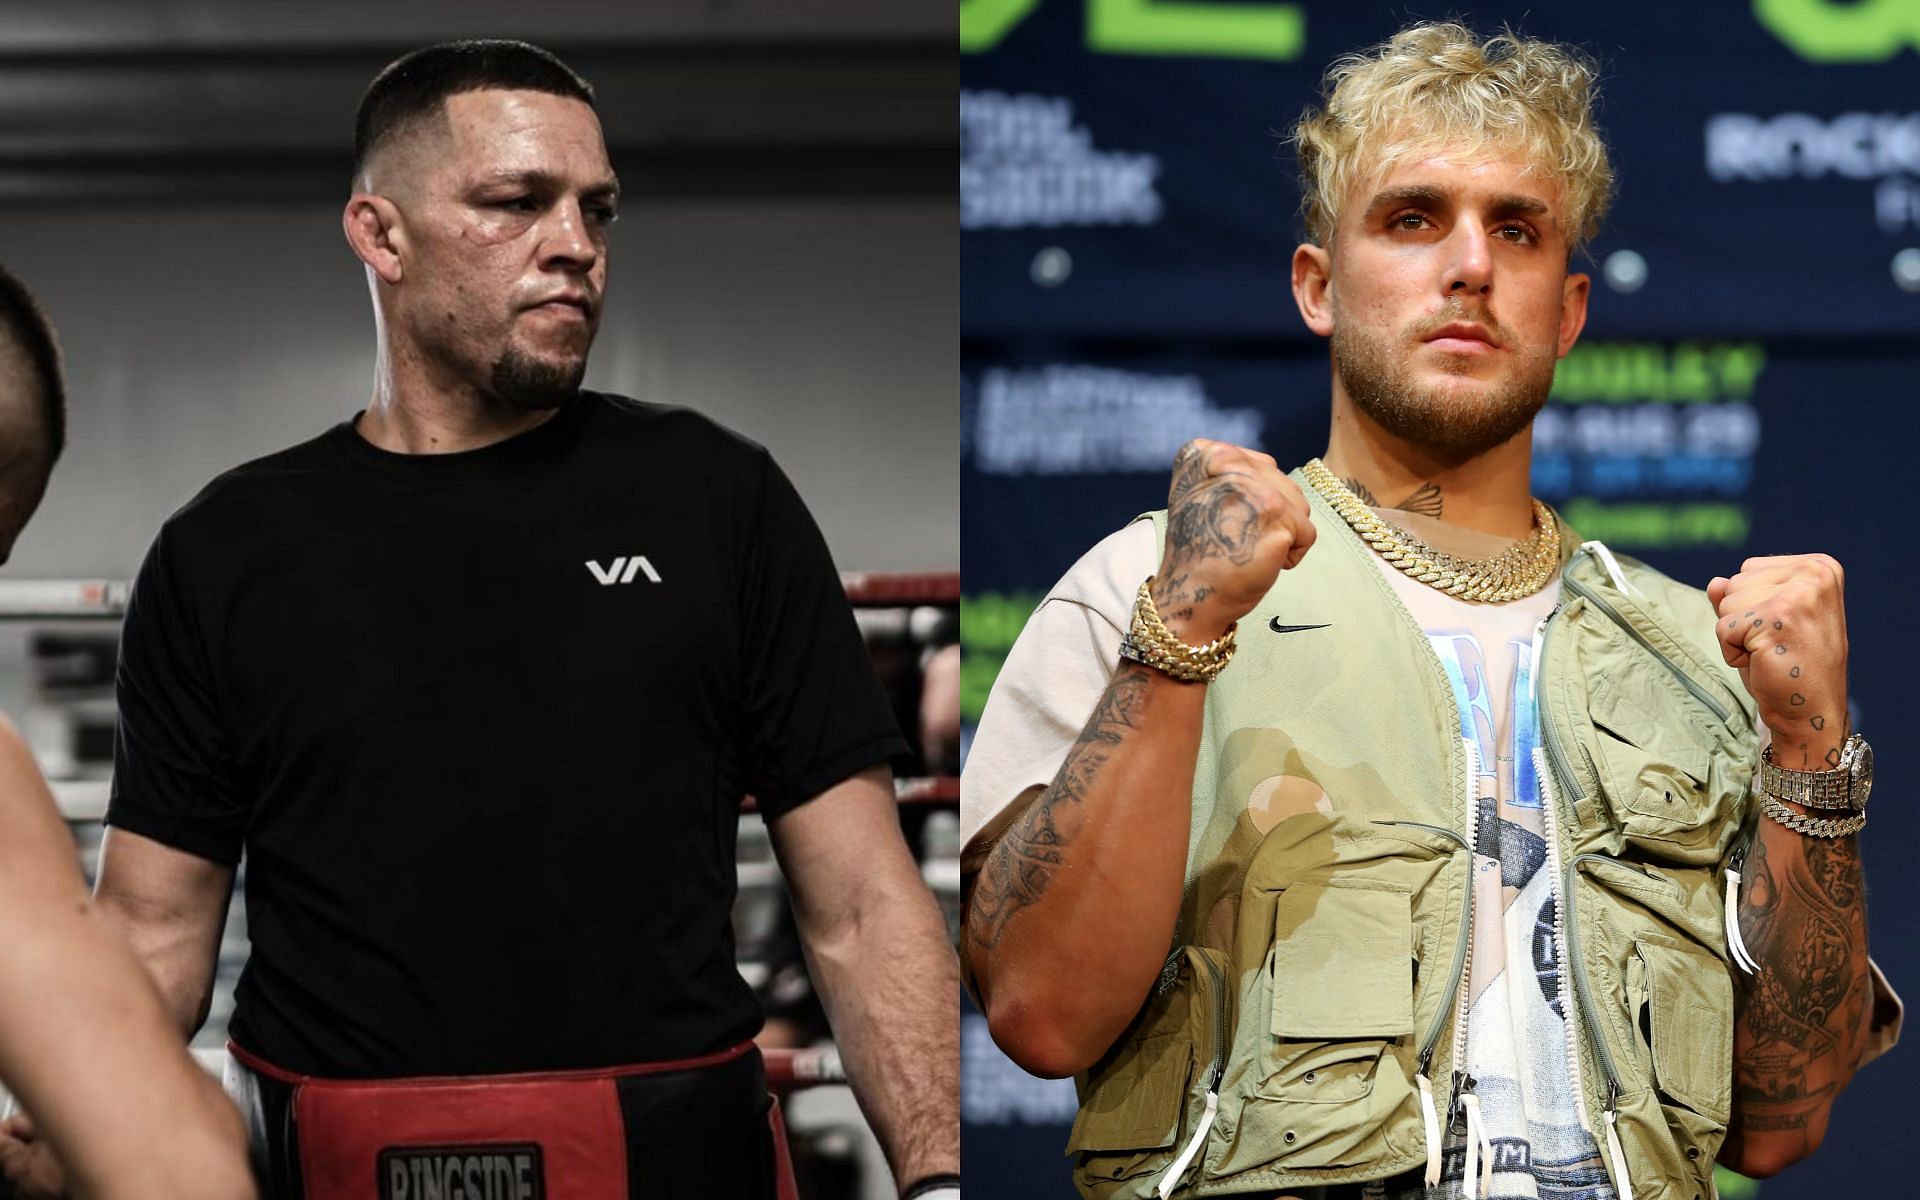 Nate Diaz and Jake Paul [Image credits: @natediaz209 on Instagram and Getty Images]